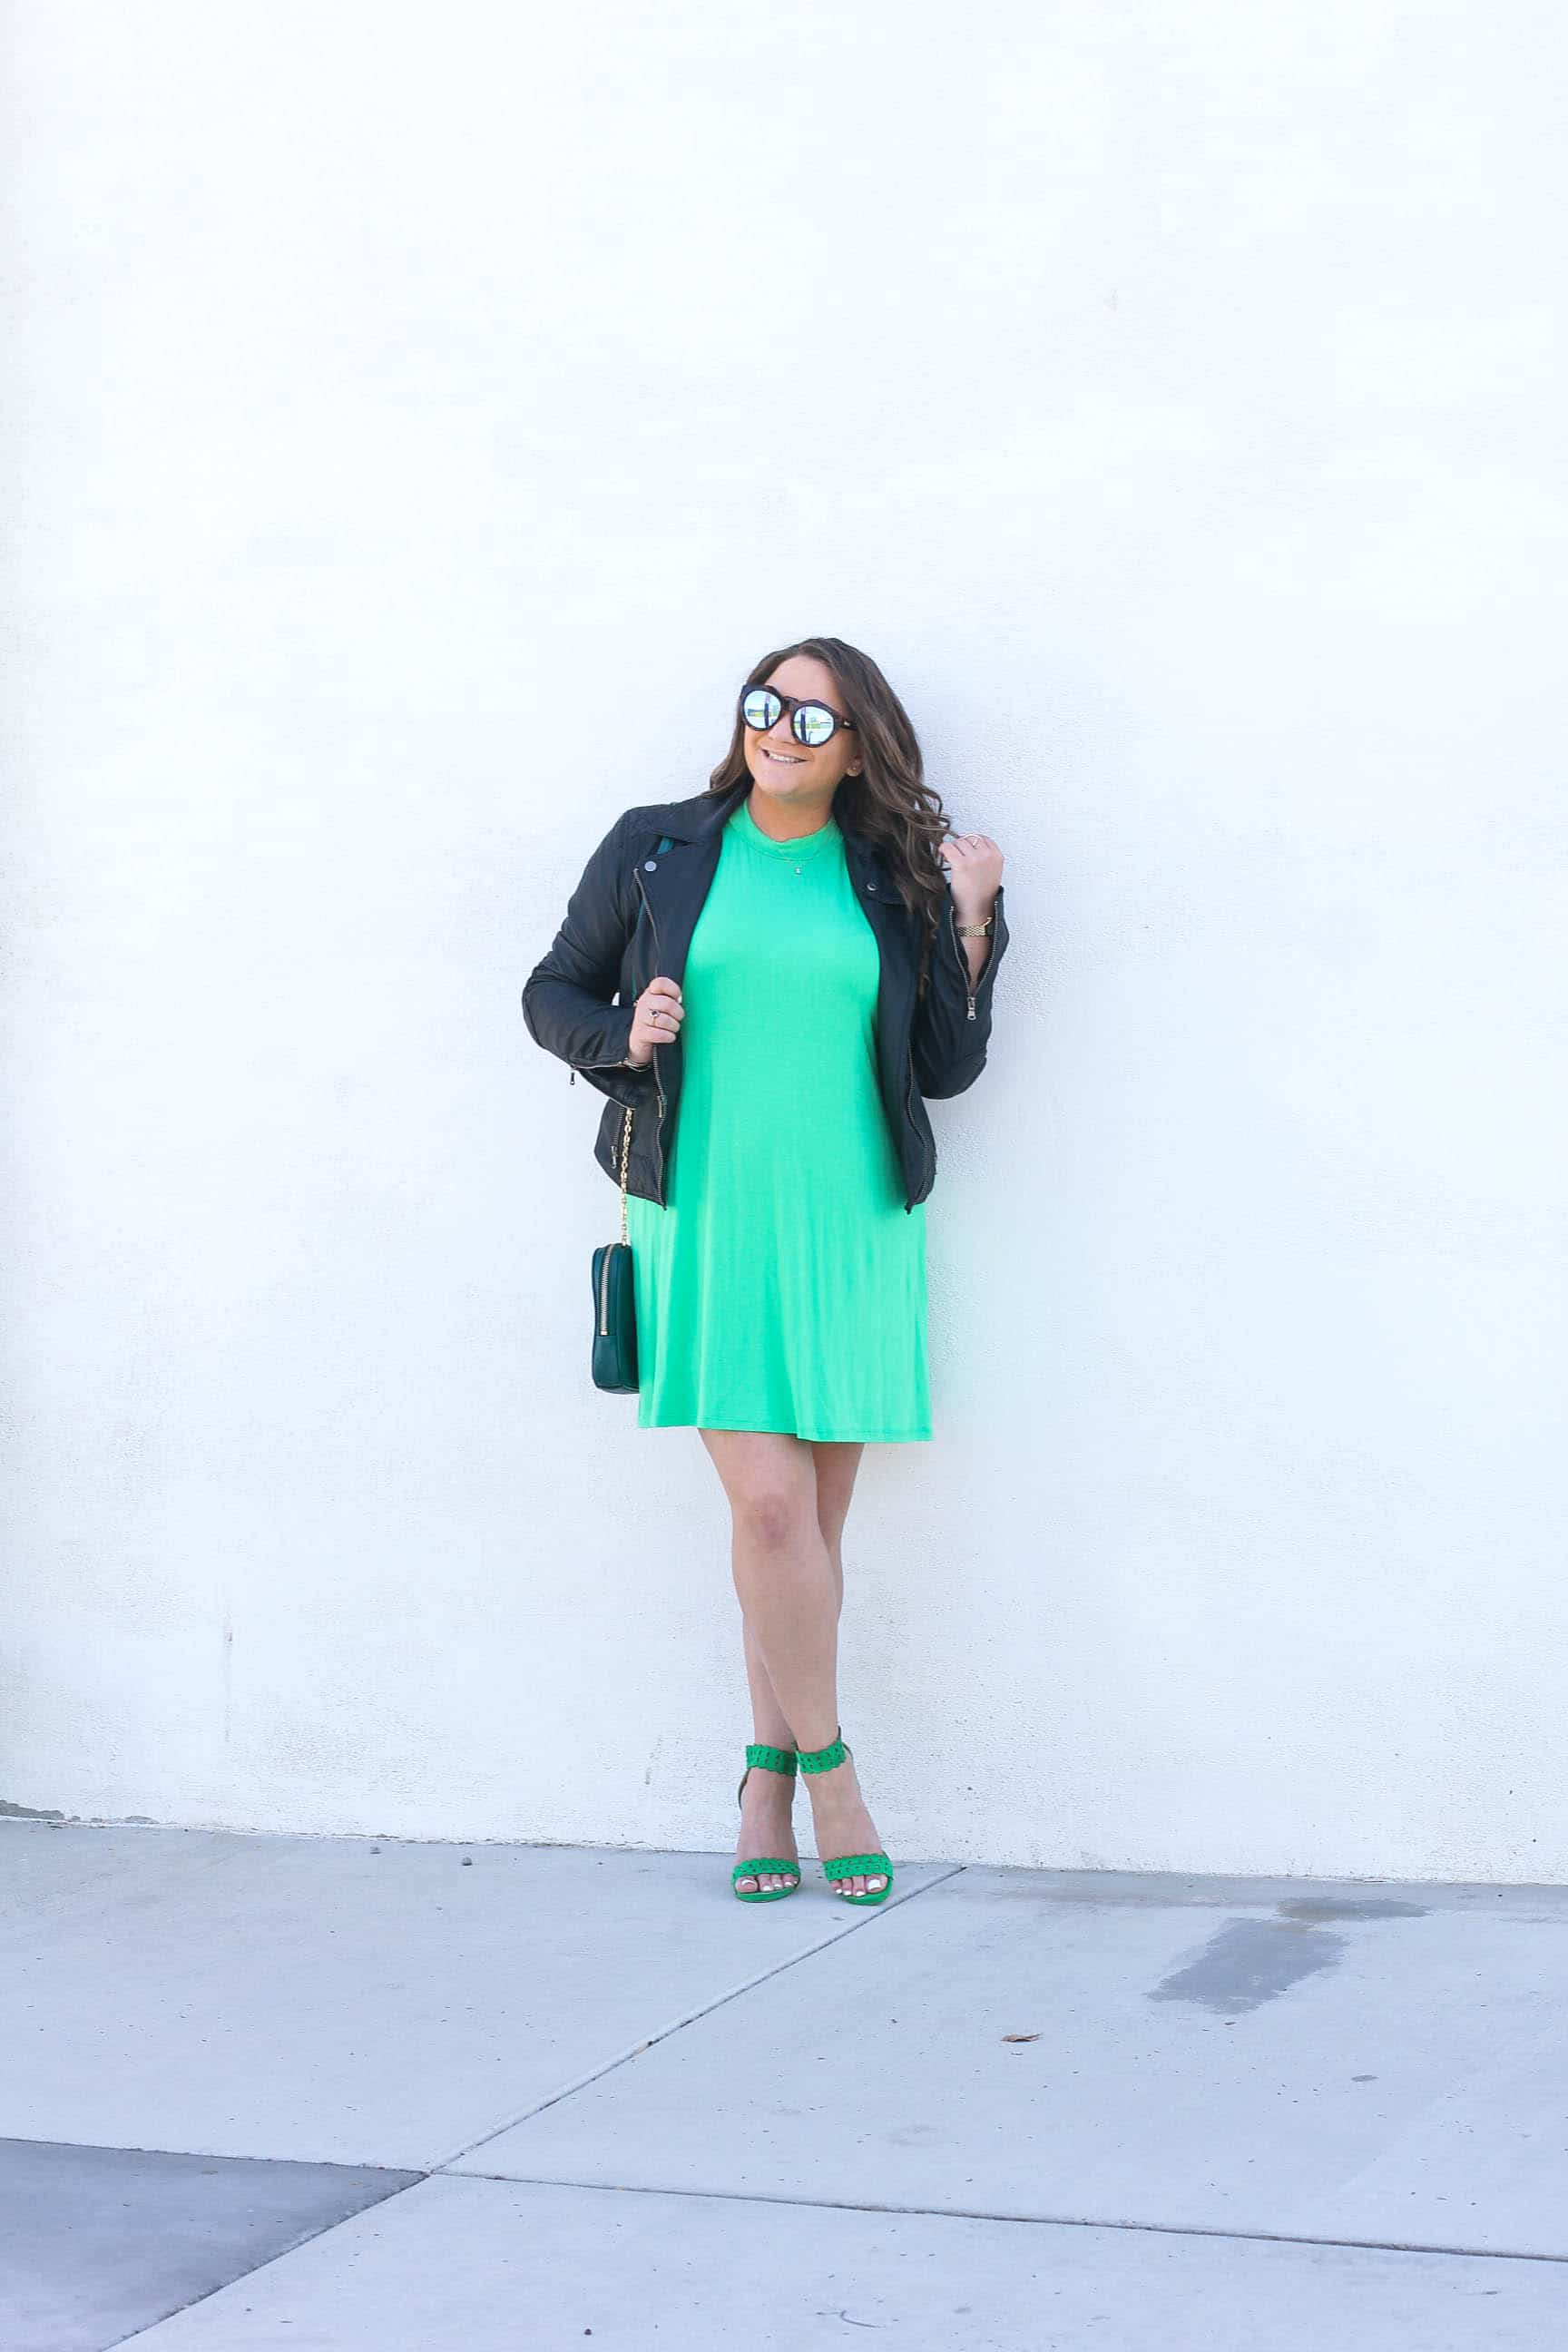 la blogger, style blogger, fashion blogger, missyonmadison, missyonmadison blog, missyonmadison instagram, melissa tierney, st patricks day, st patricks day 2018, green dress, what to wear for st patricks day, green look, bloglovin, green heels, green handbag, green outfit, moto jacket, faux leather moto jacket, 